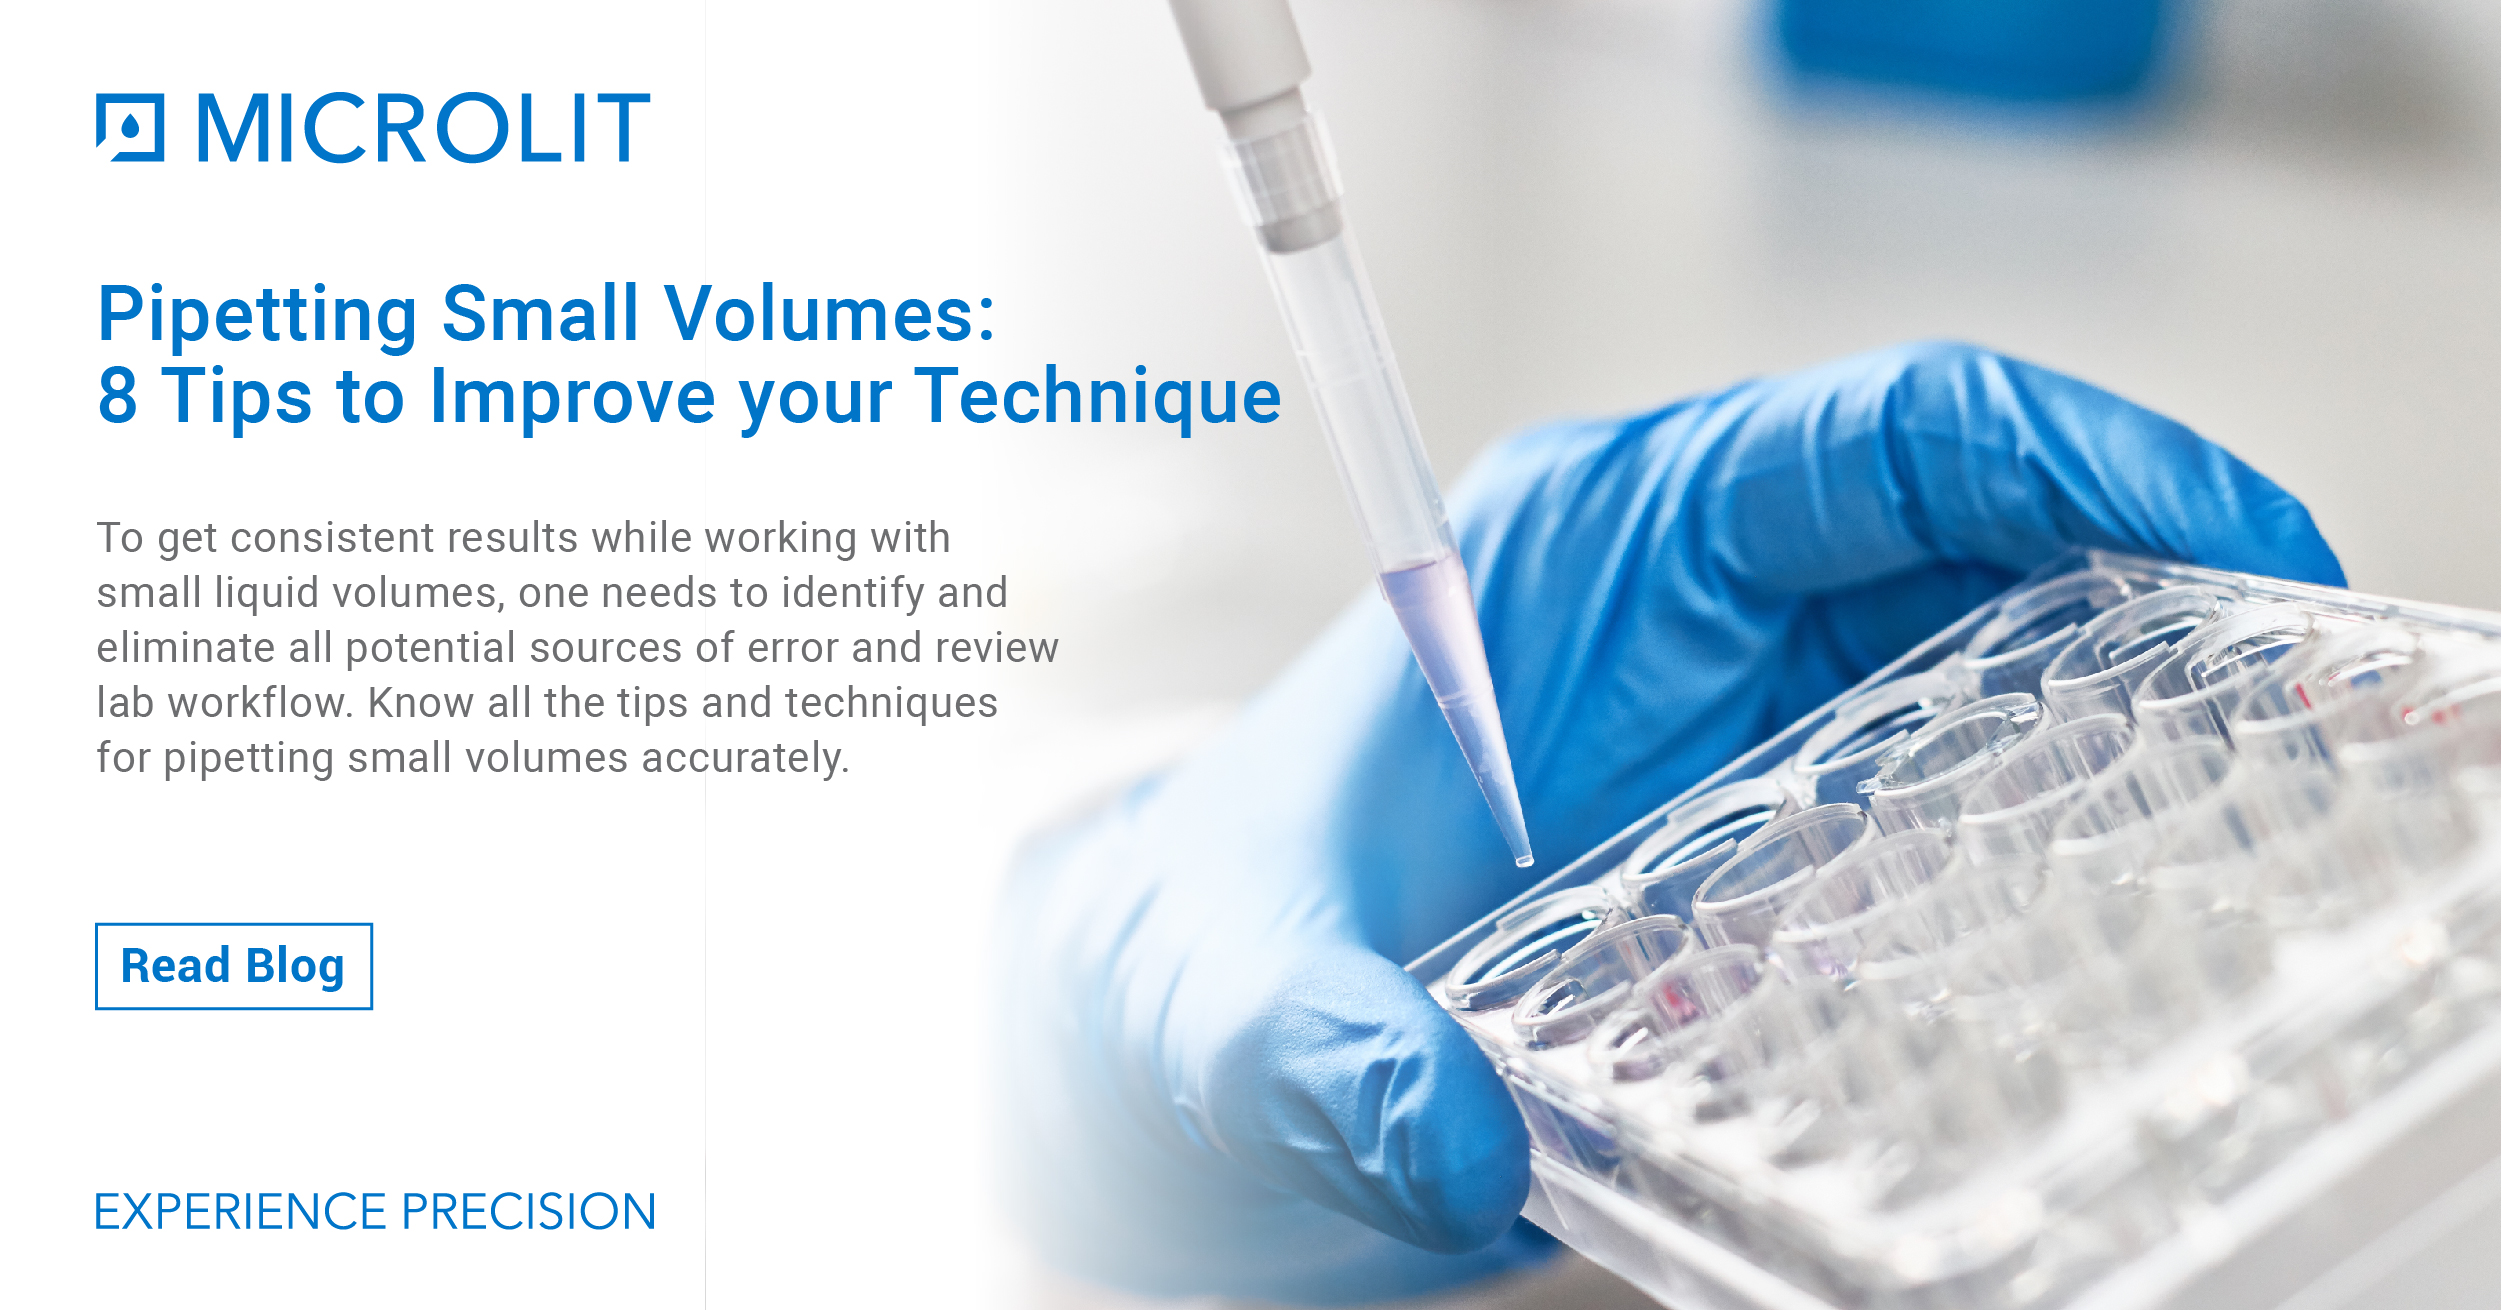 Pipetting Small Volumes: 8 Tips to Improve your Technique